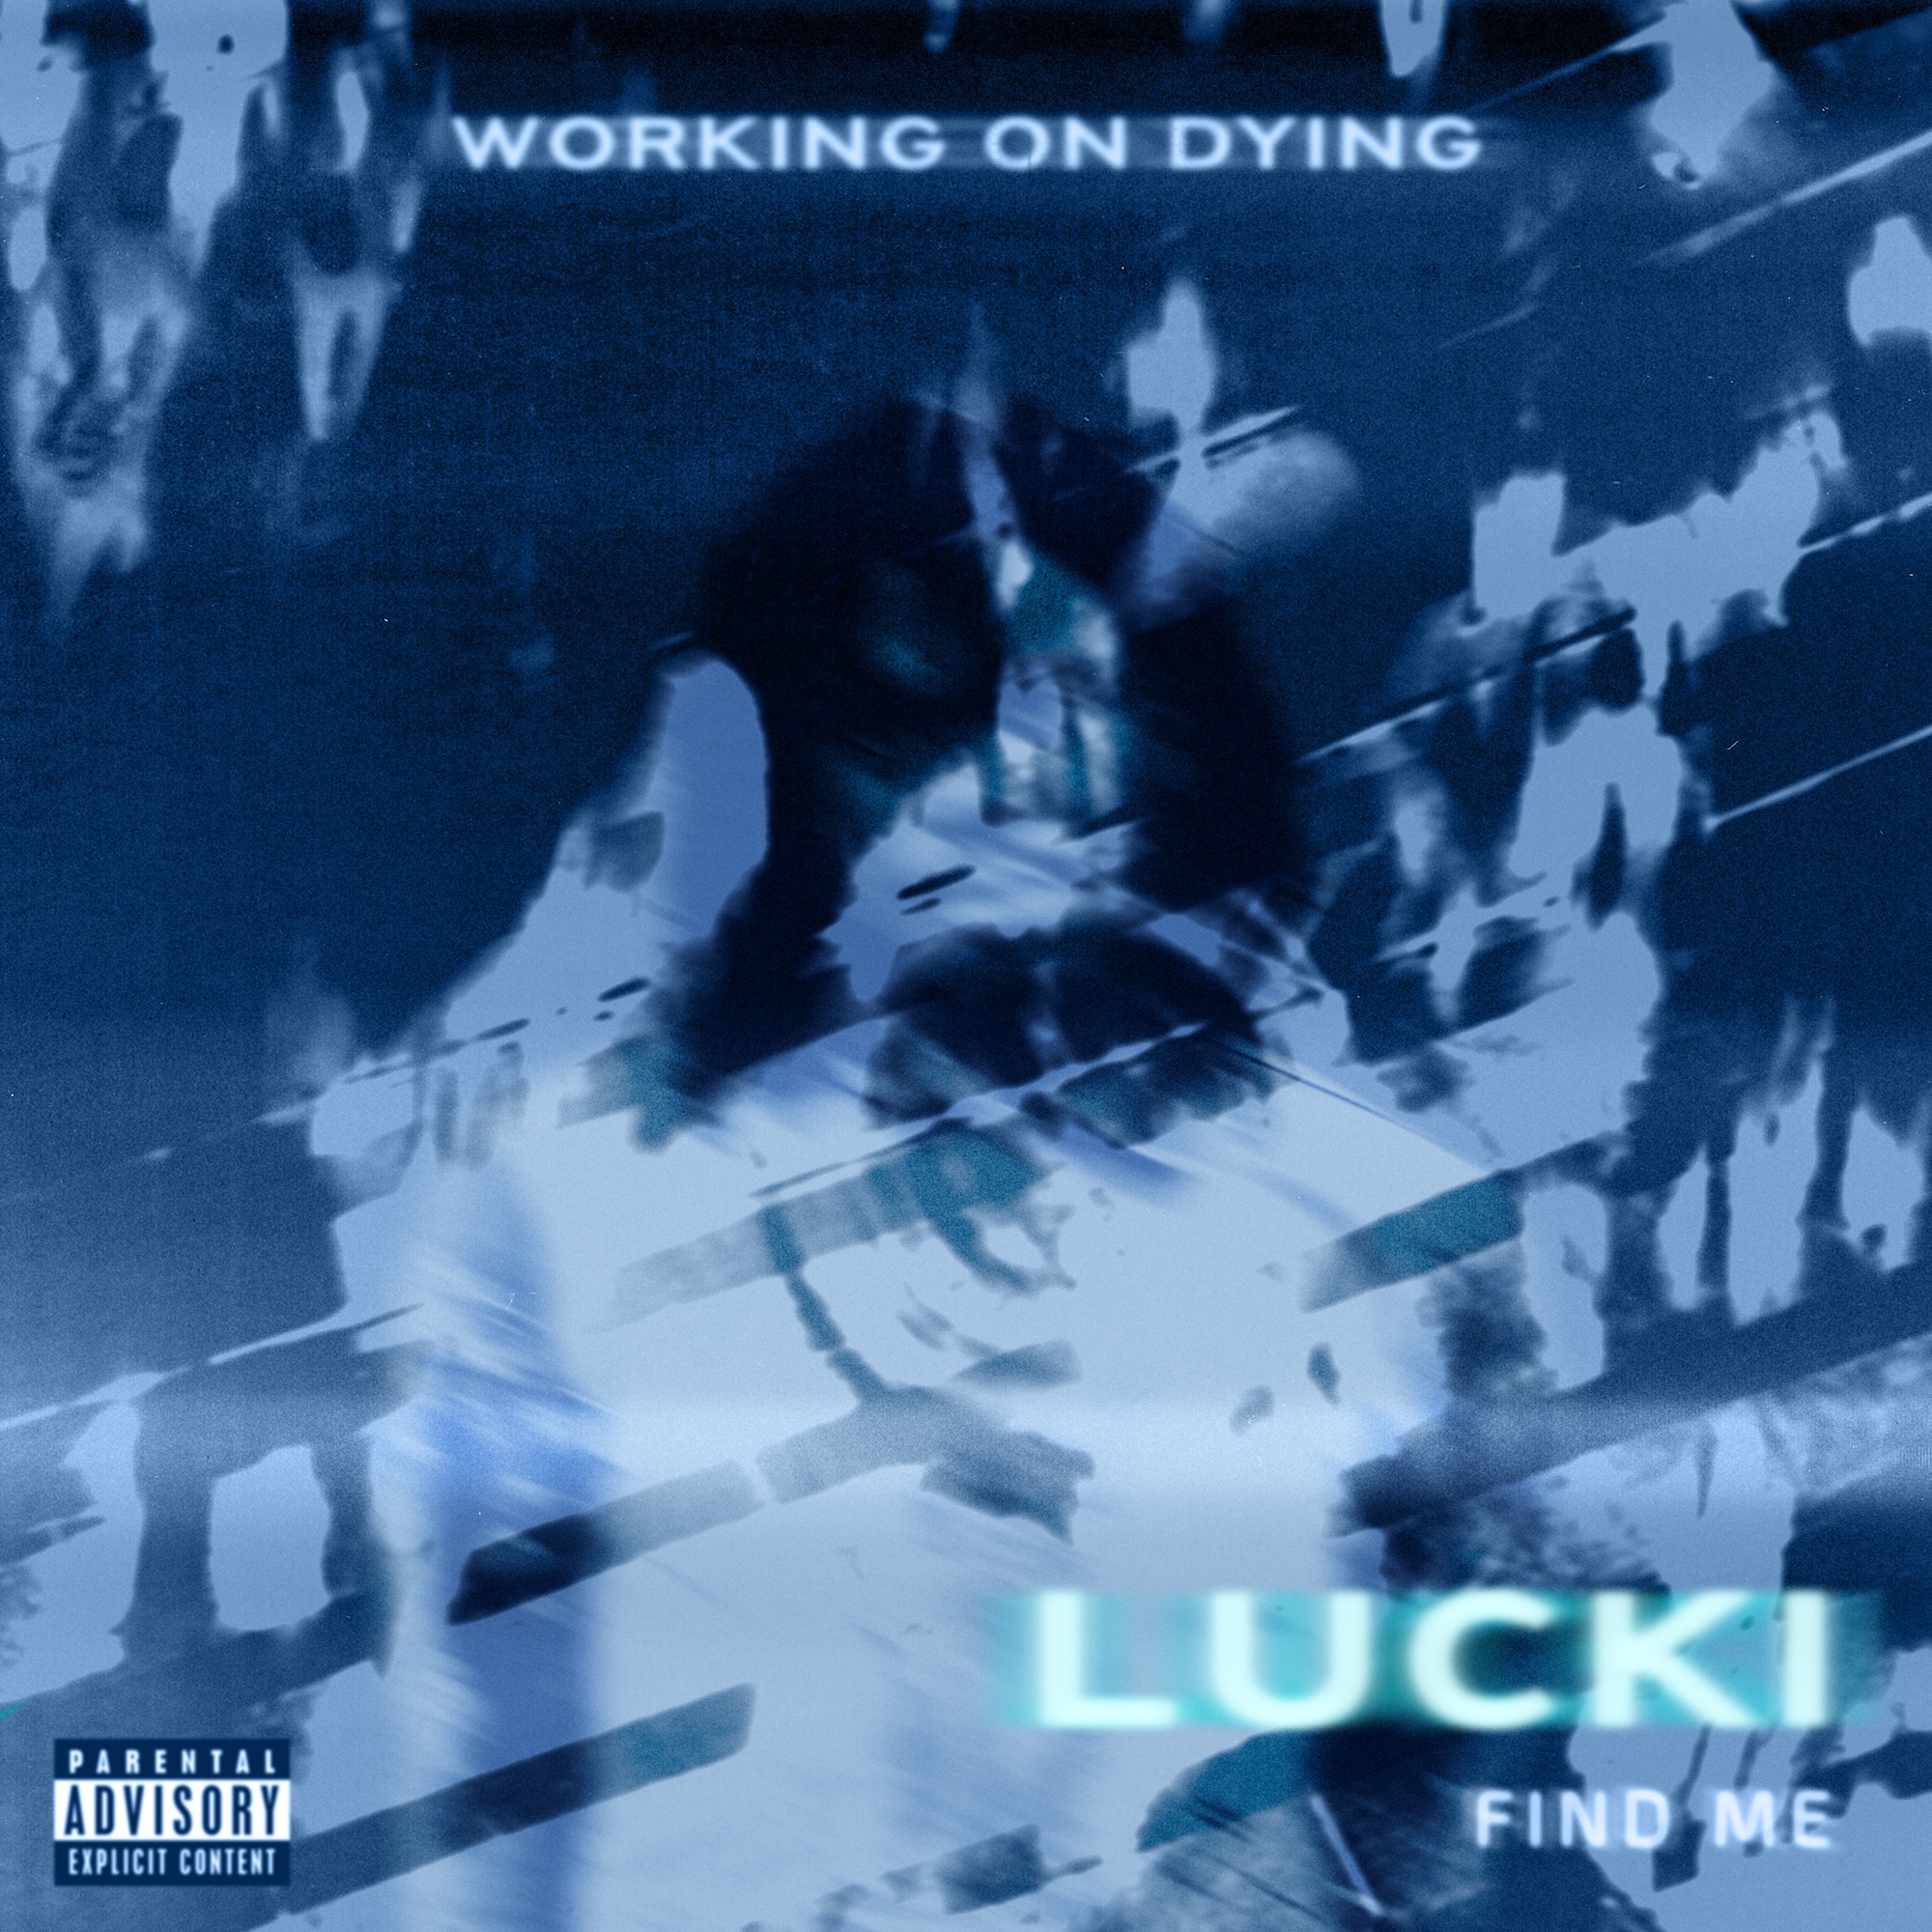 Working on Dying & Lucki - Find Me - Single